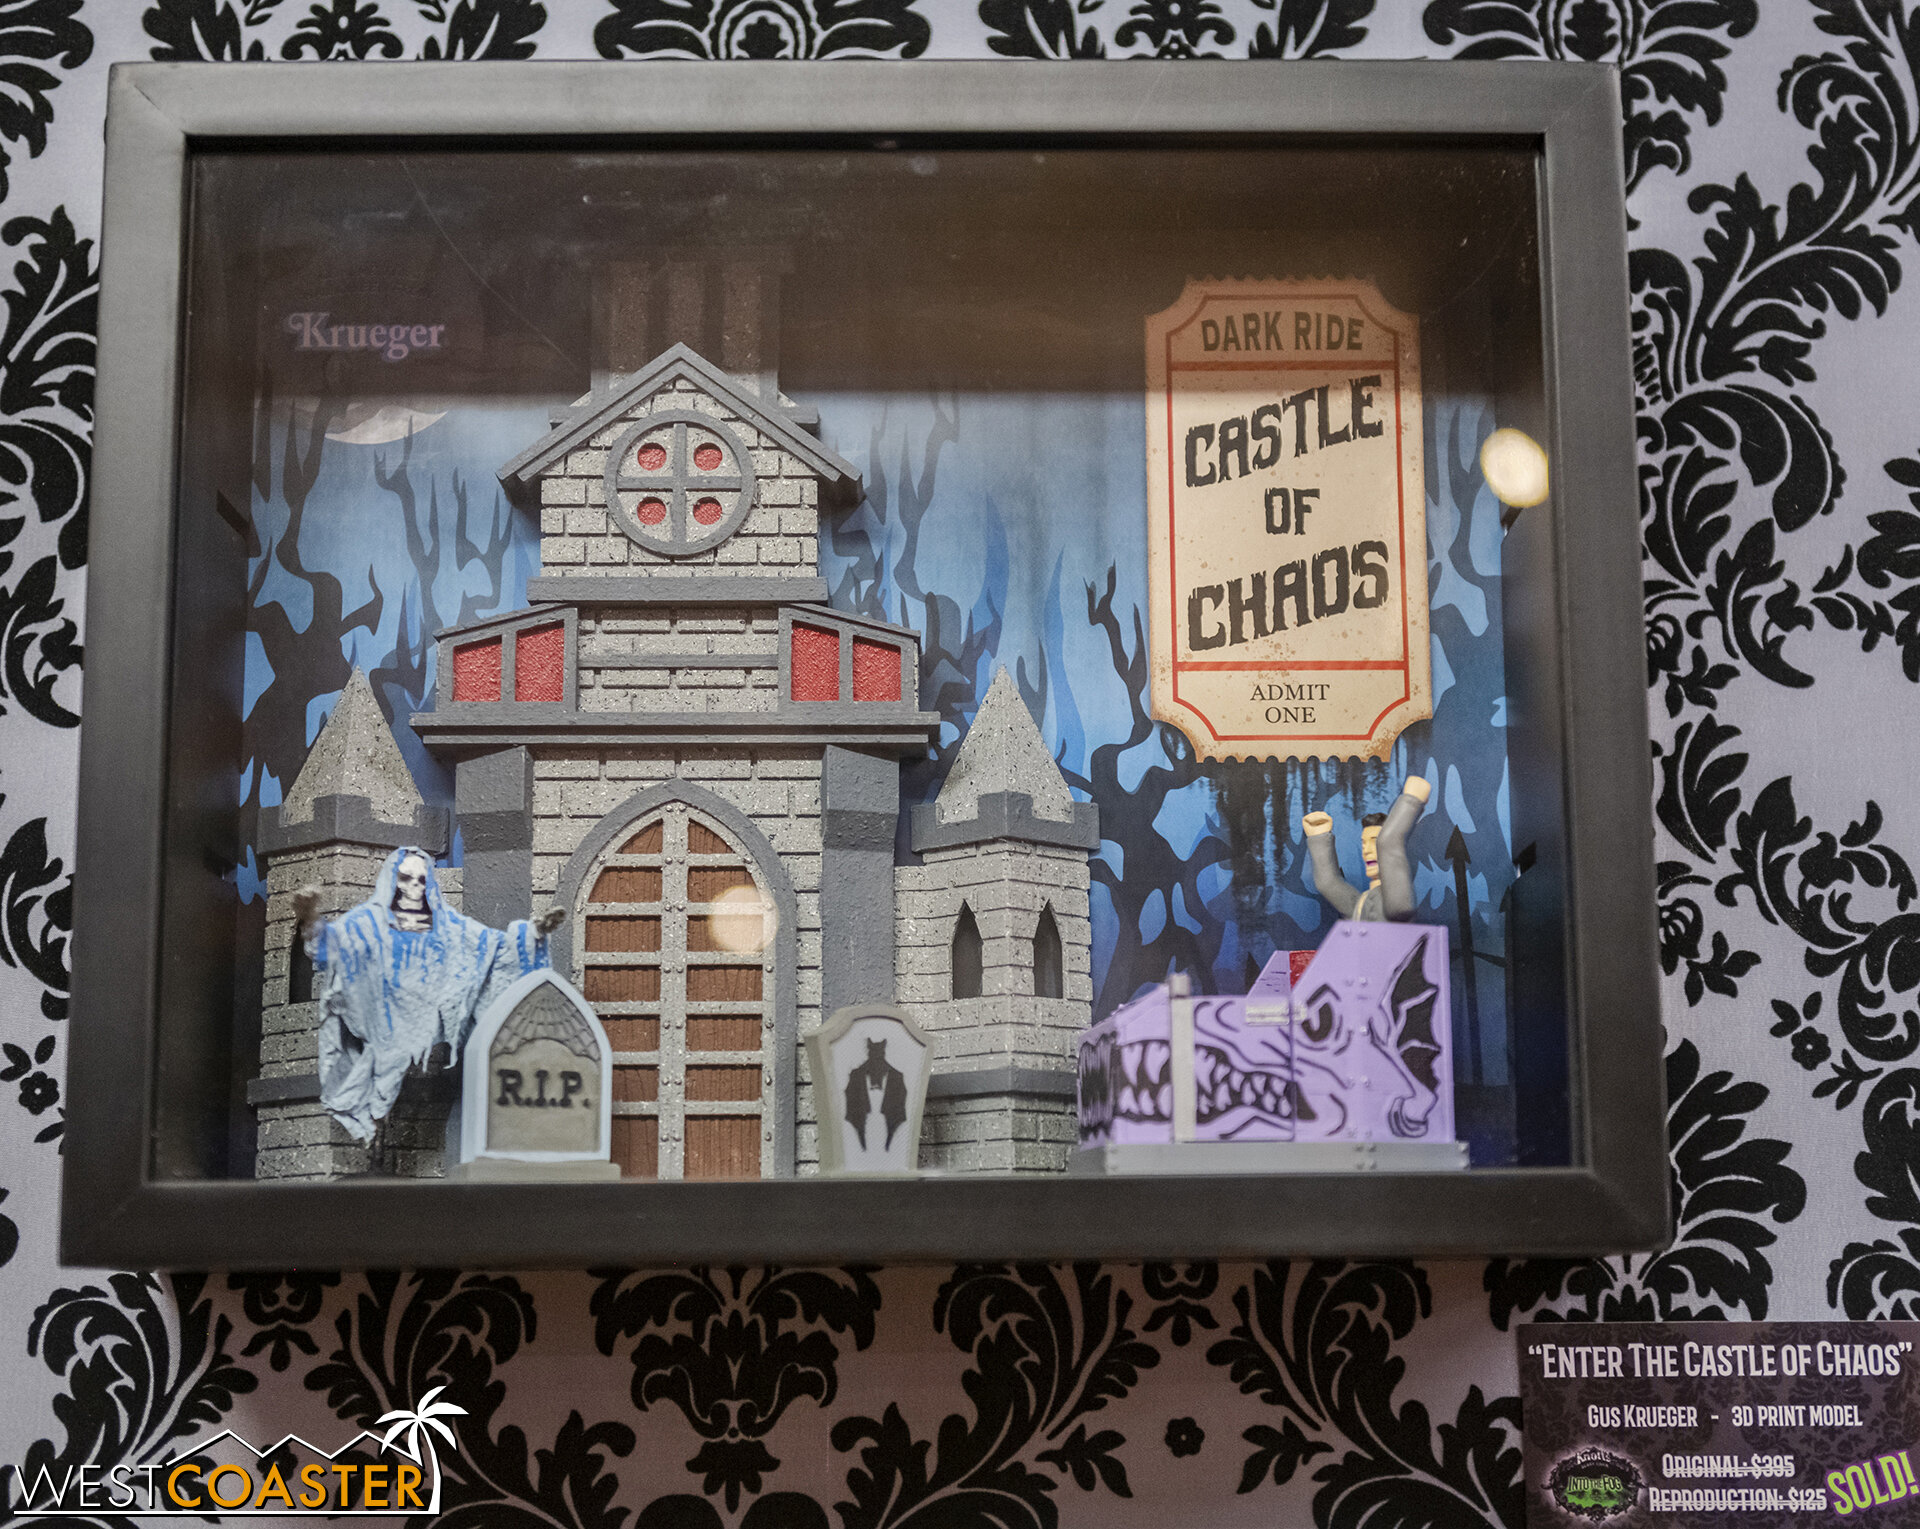  Scary Farm designer Gus Kreuger crafted this great diorama of Dark Ride. 